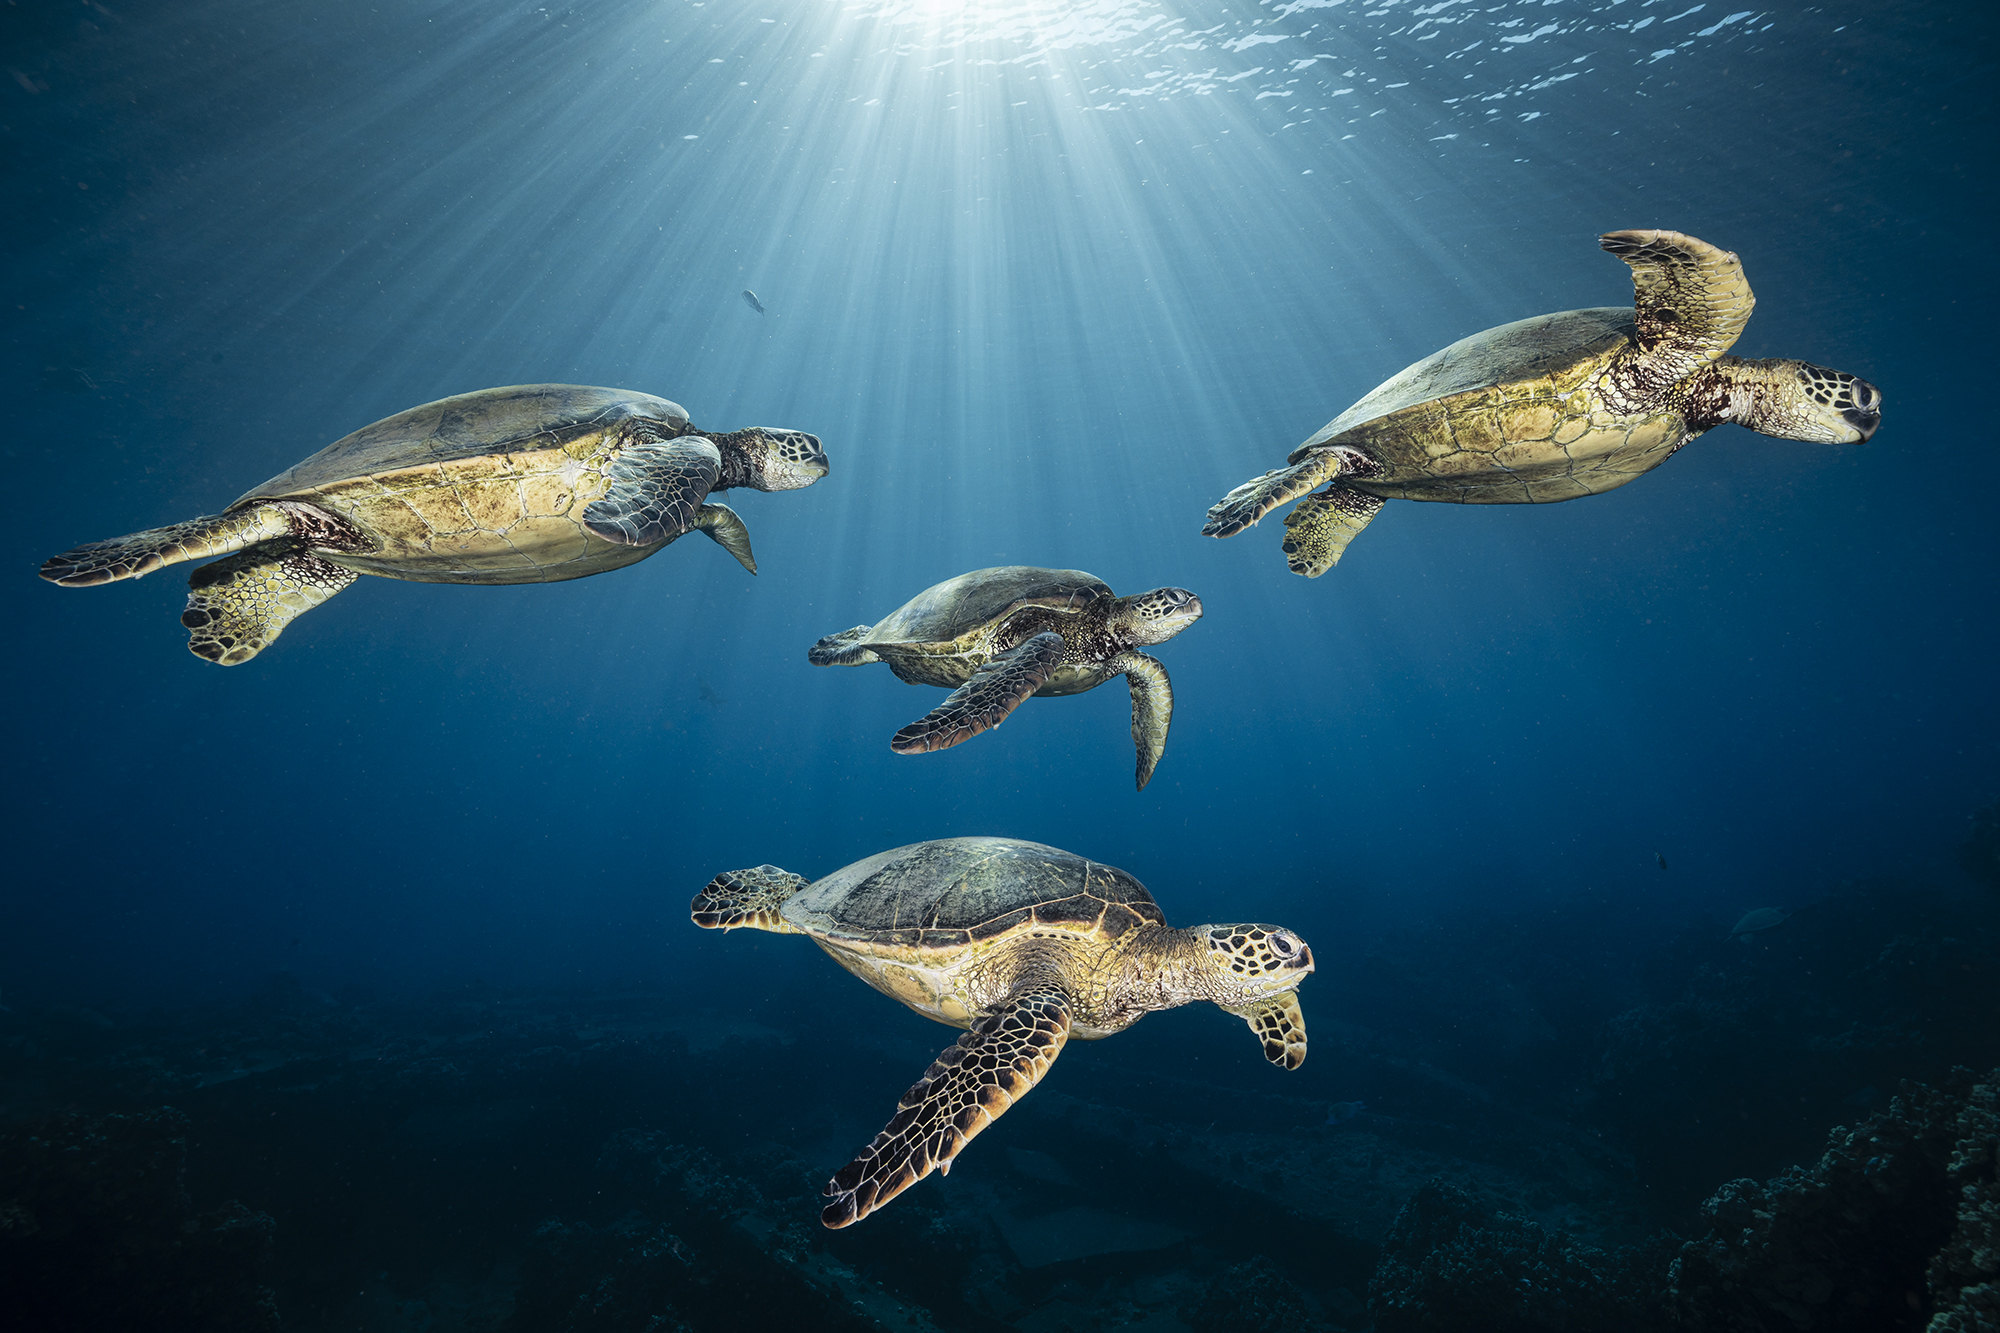 Four green sea turtles serenely swimming together under the sun’s rays in a single frame. Hawaii